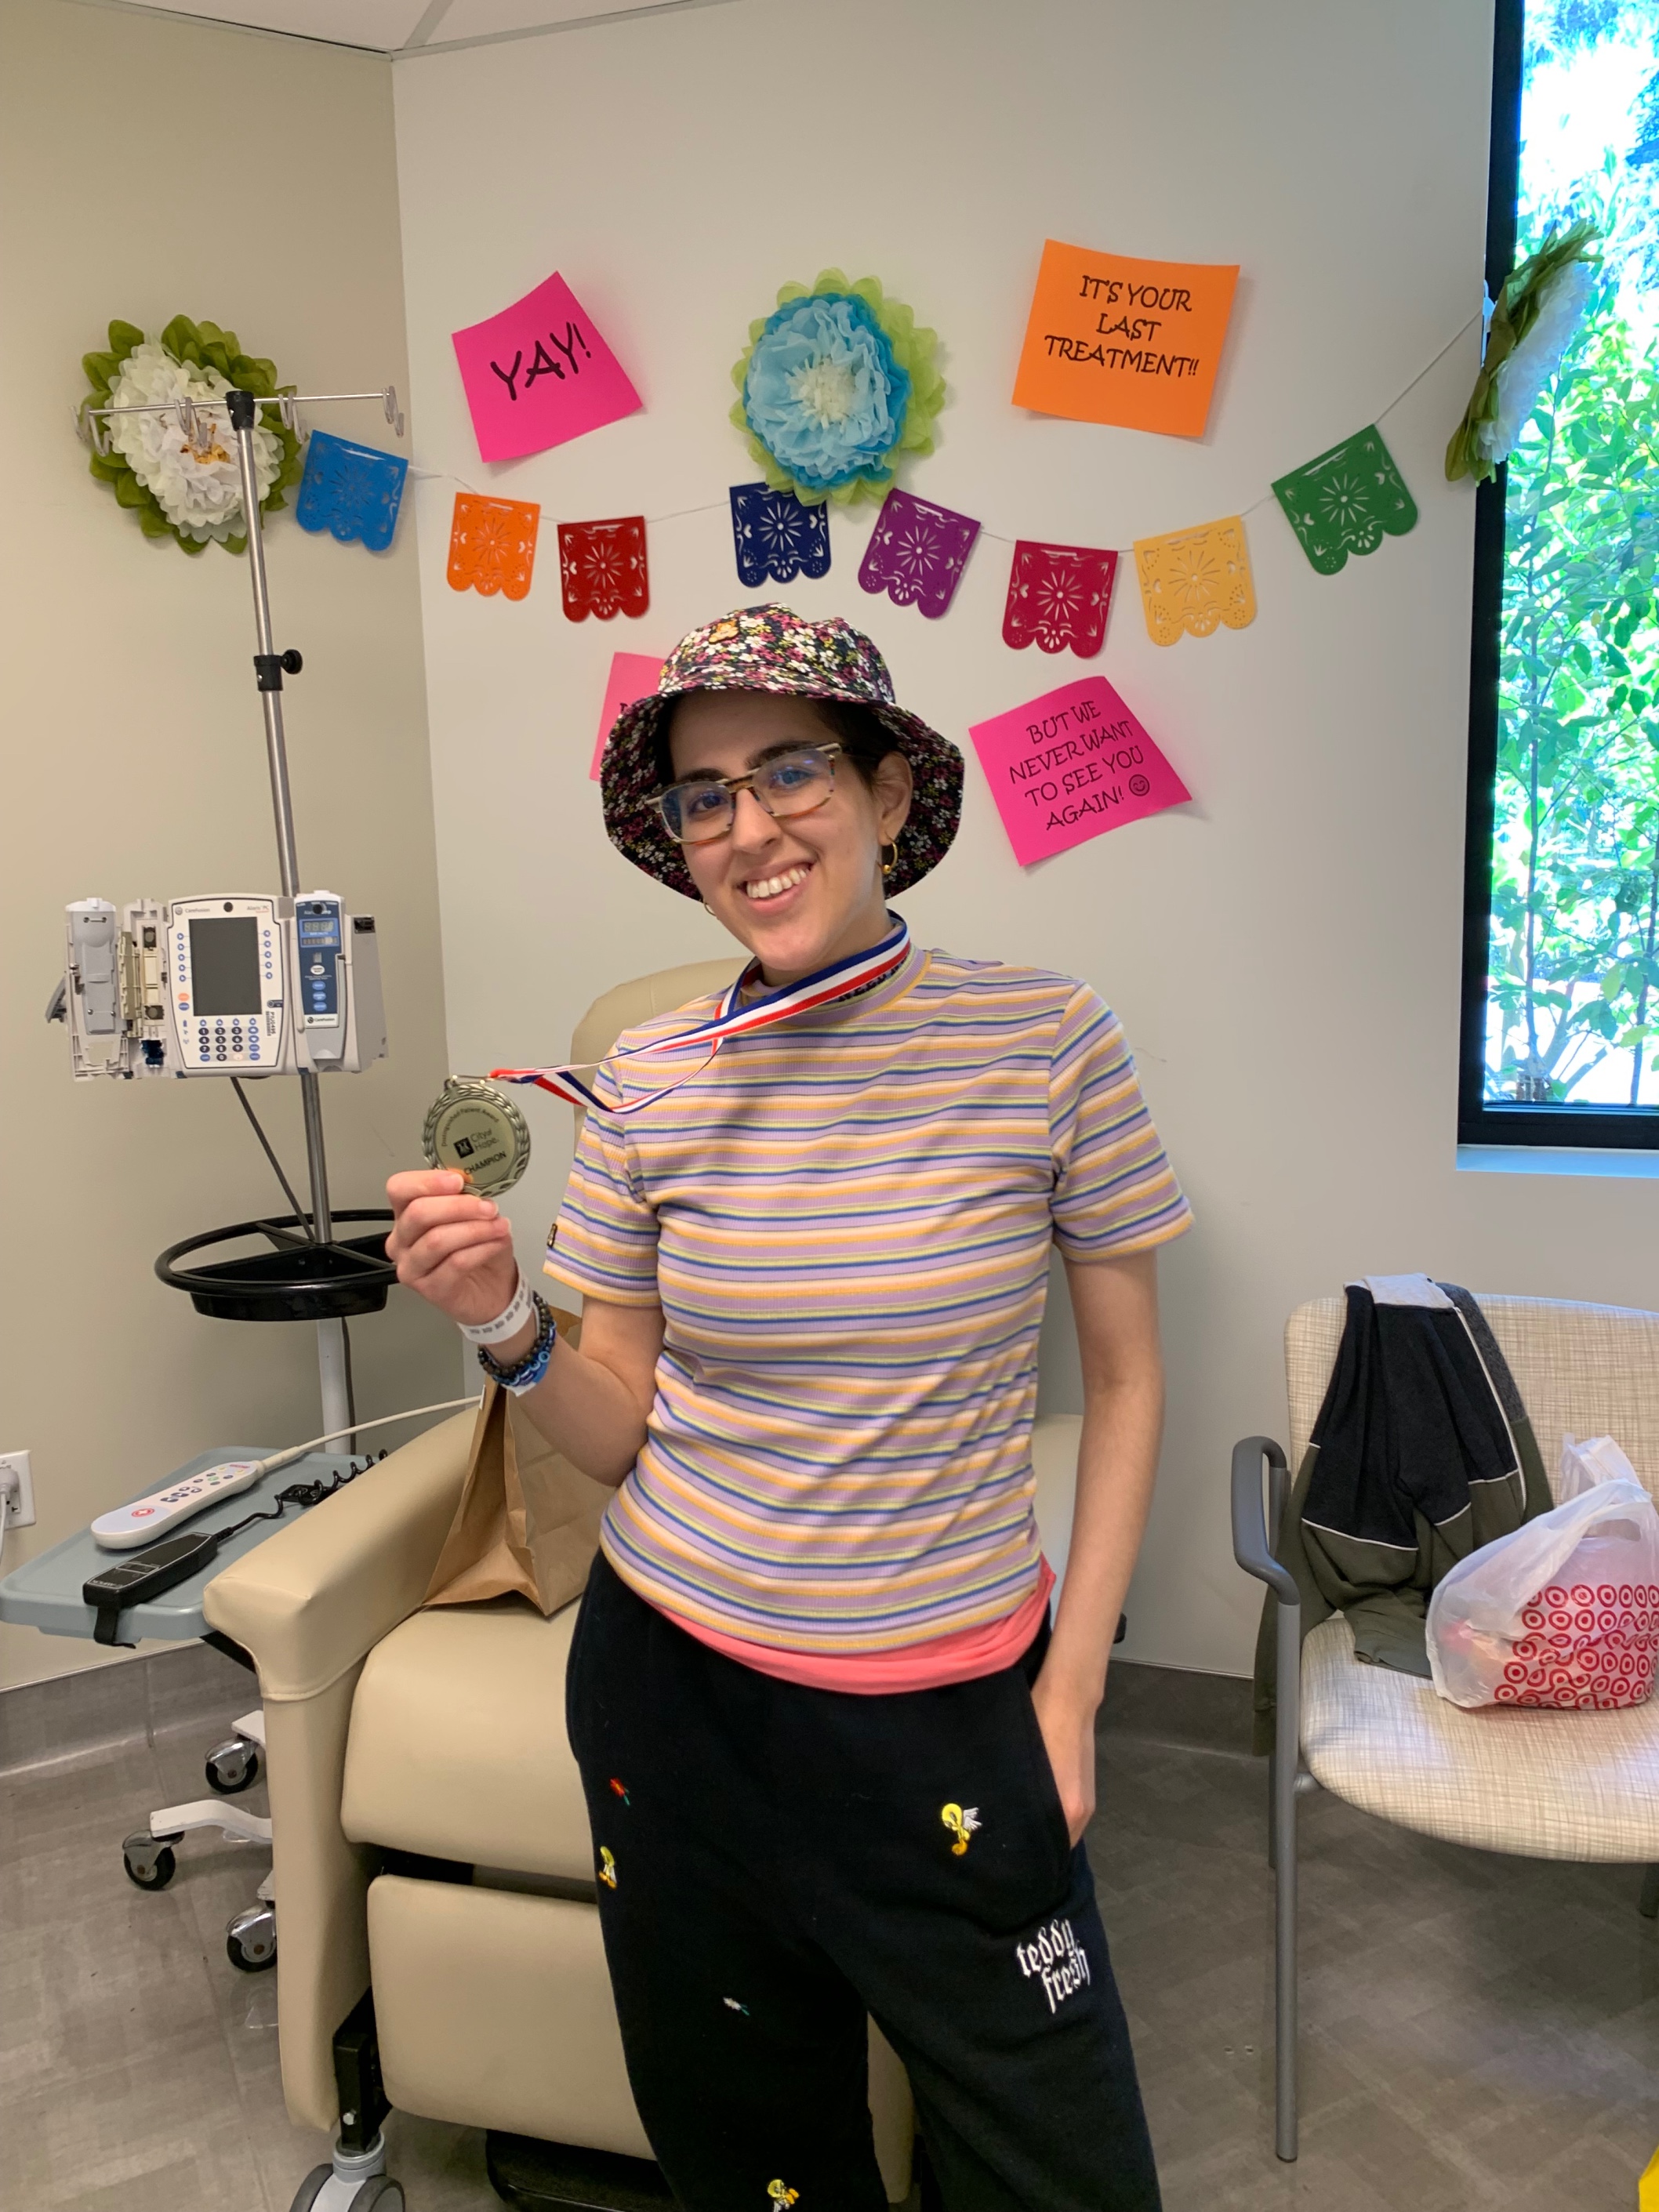 Young woman with glasses wearing a floral bucket hat holding a medal in her hand striped shirt and sweatpants